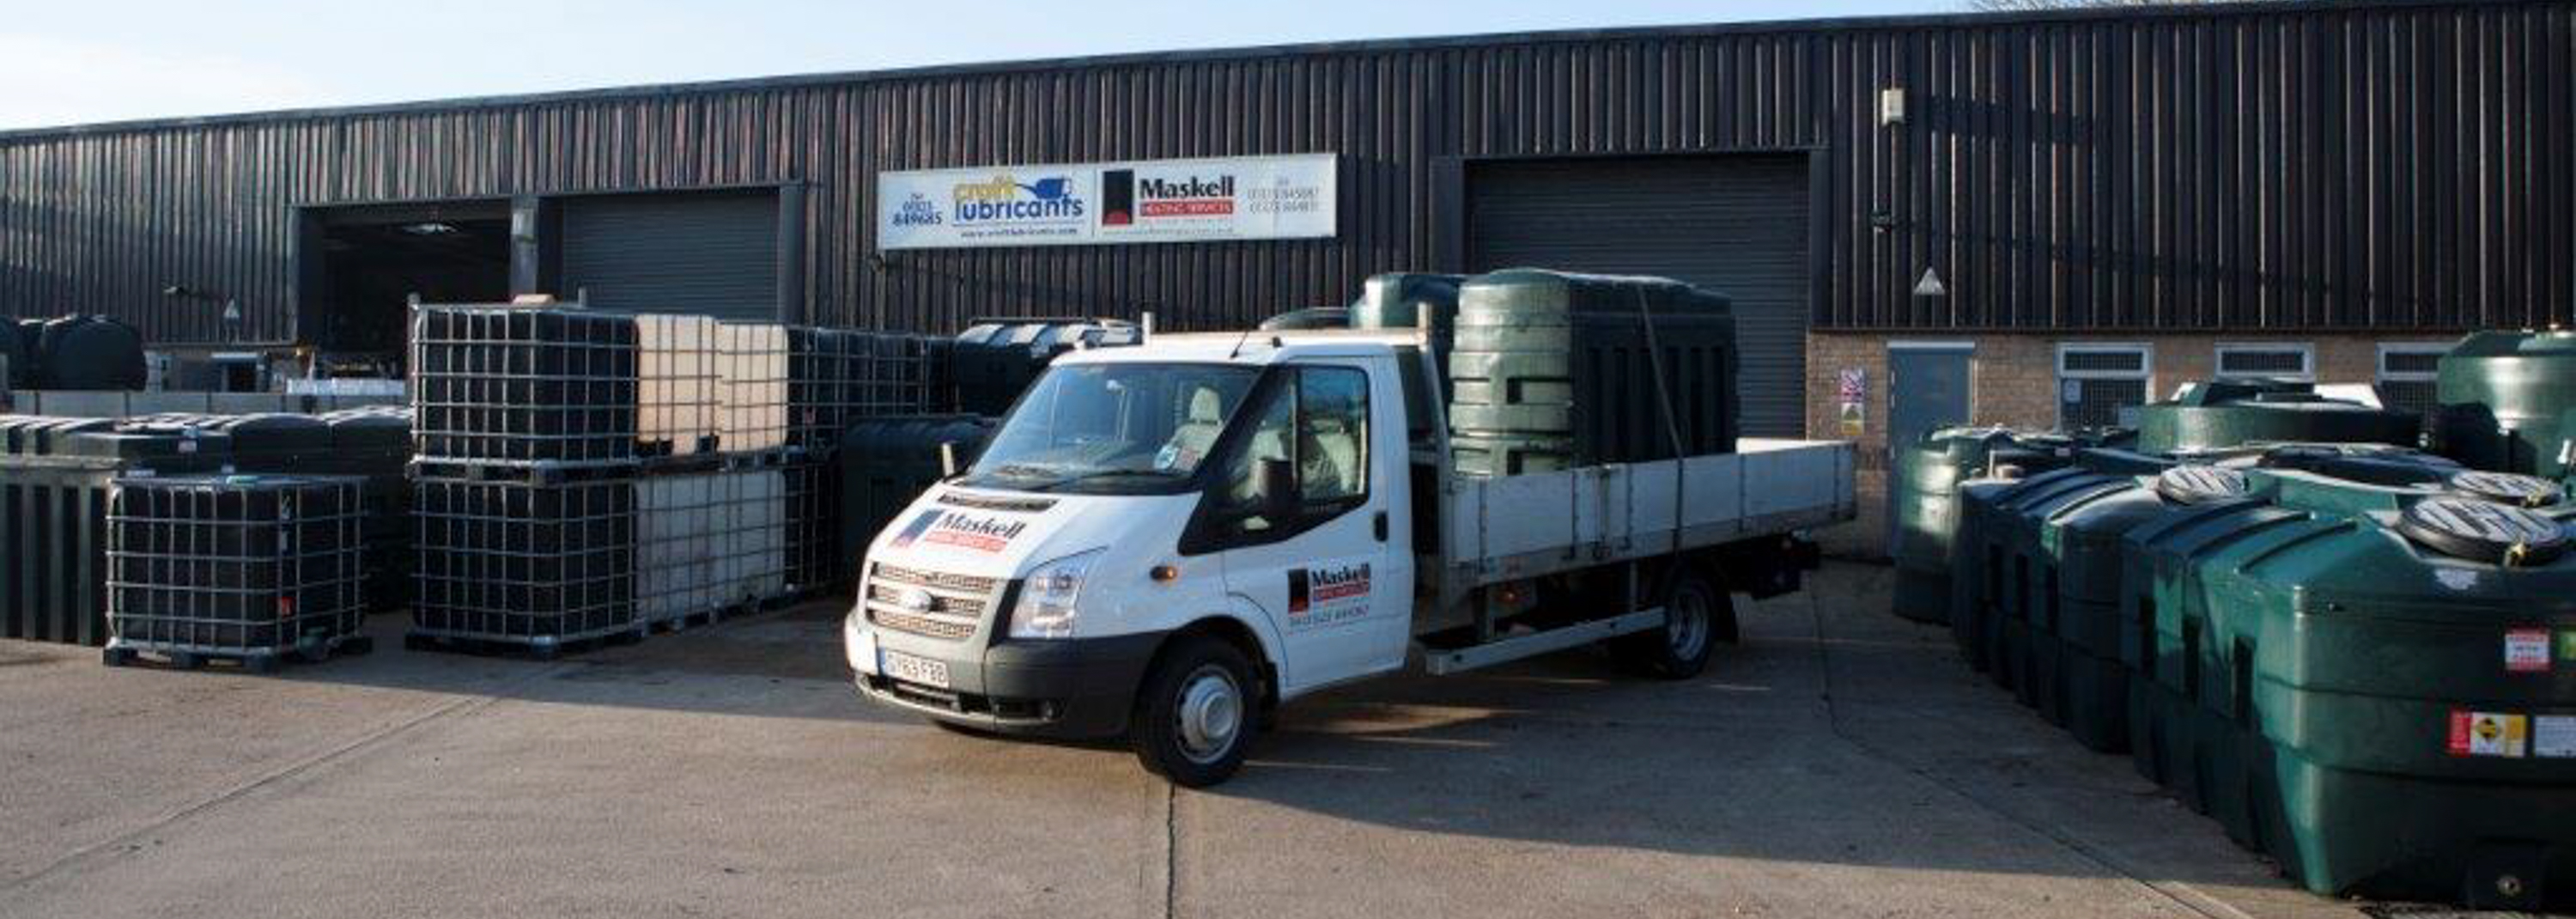 Maskell Heating Services - Oil Tank Specialists